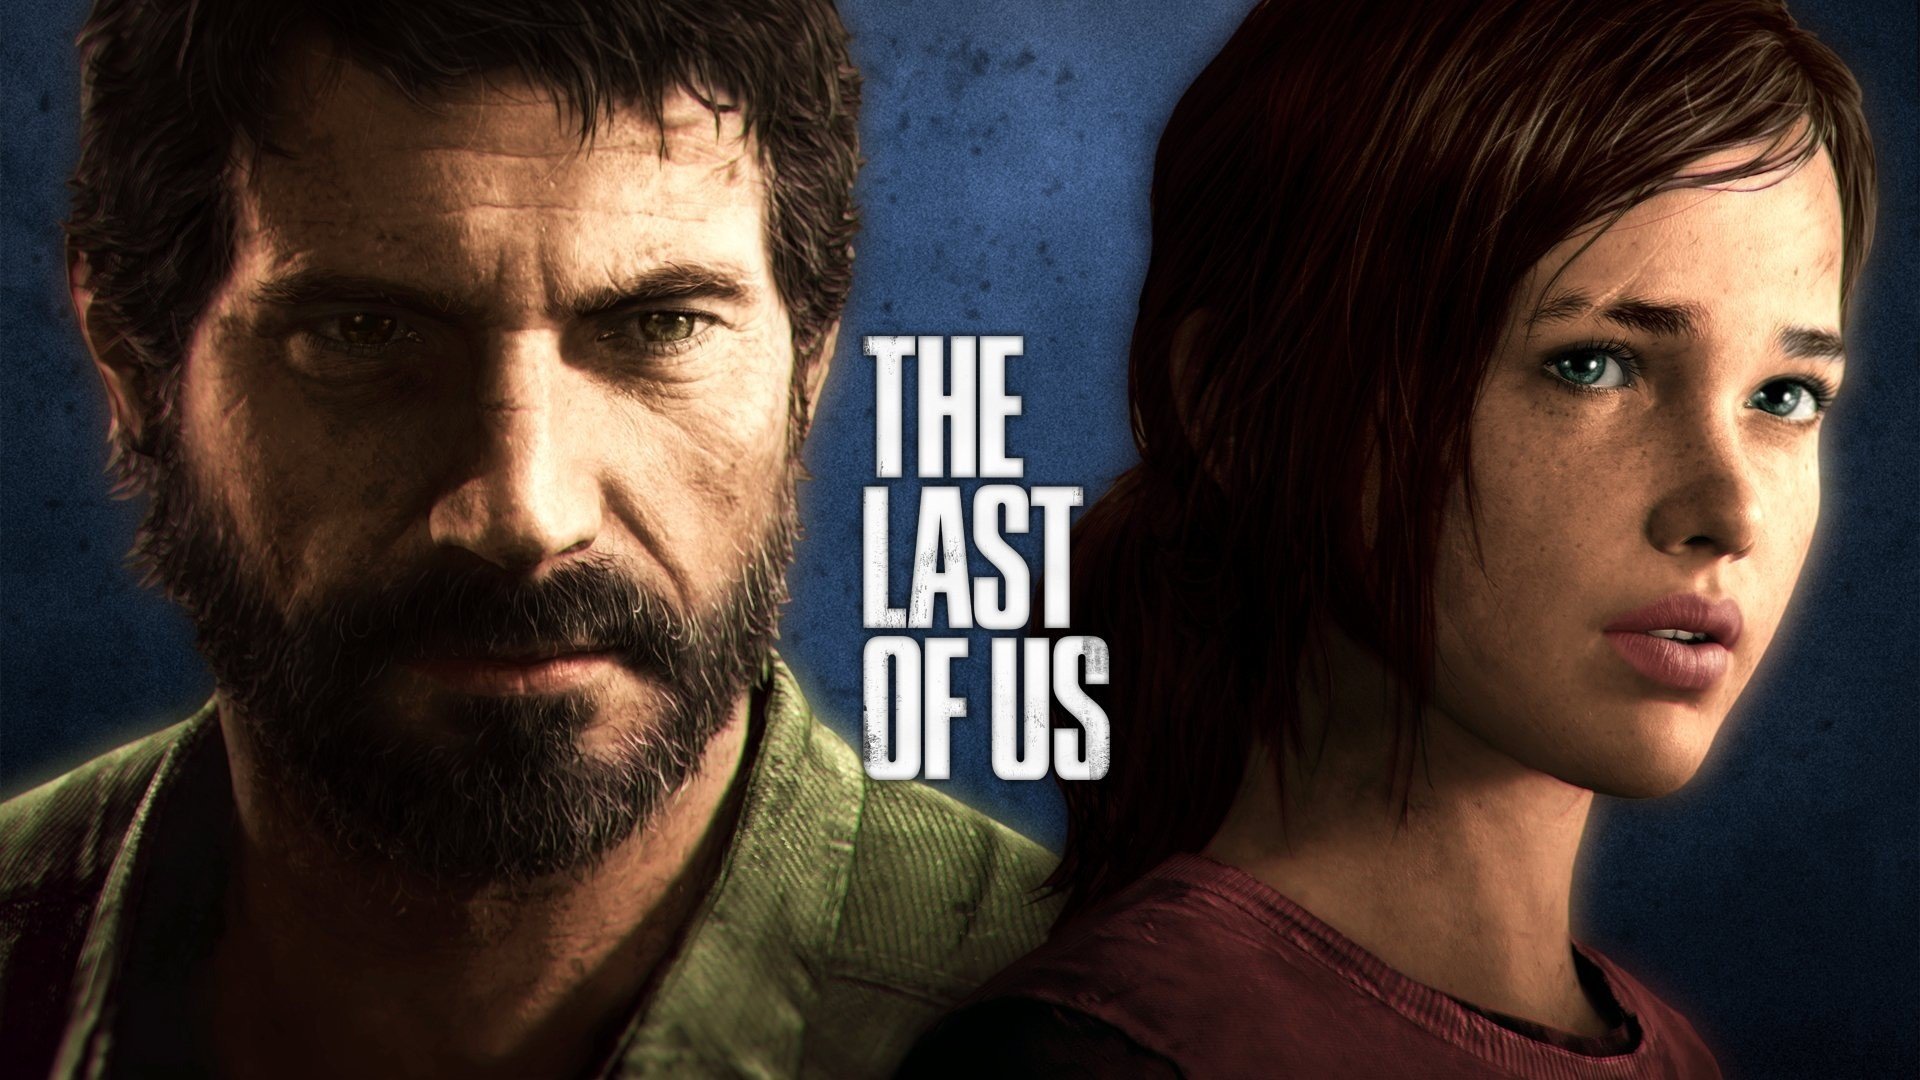 She come the game. The last of us. The last of us 1. The last of us игра.